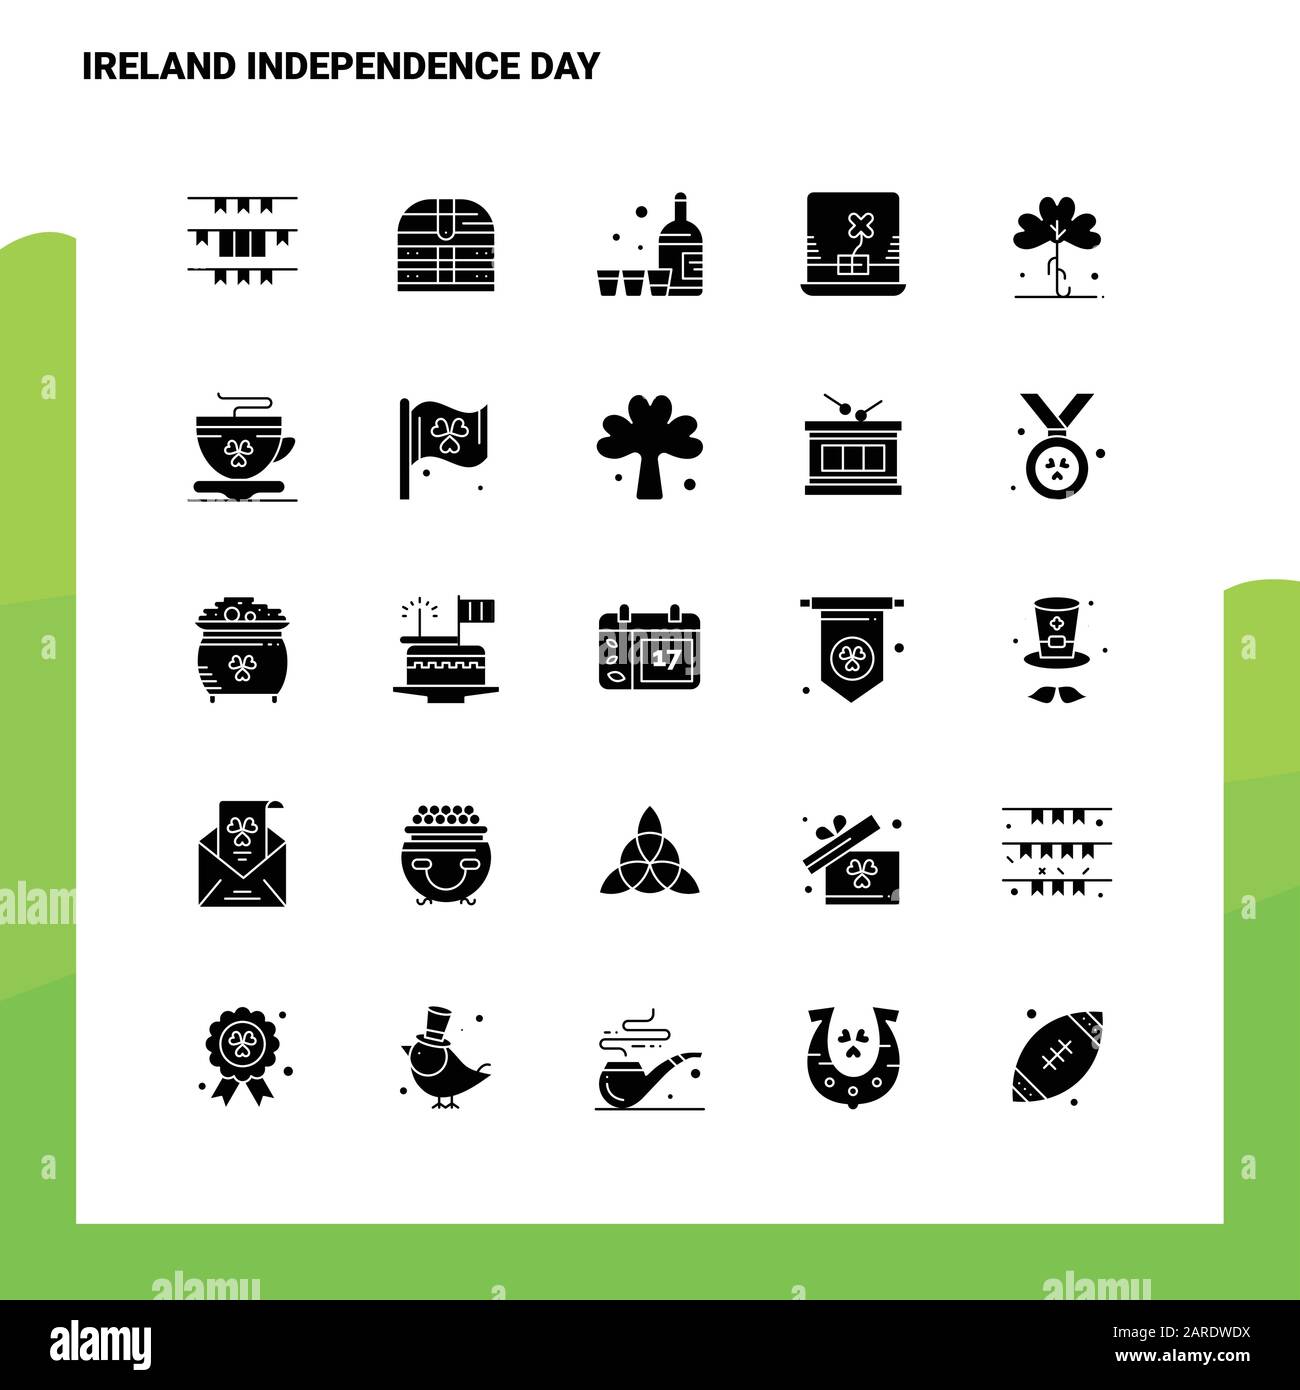 25 Ireland Independence Day Icon set. Solid Glyph Icon Vector Illustration Template For Web and Mobile. Ideas for business company. Stock Vector